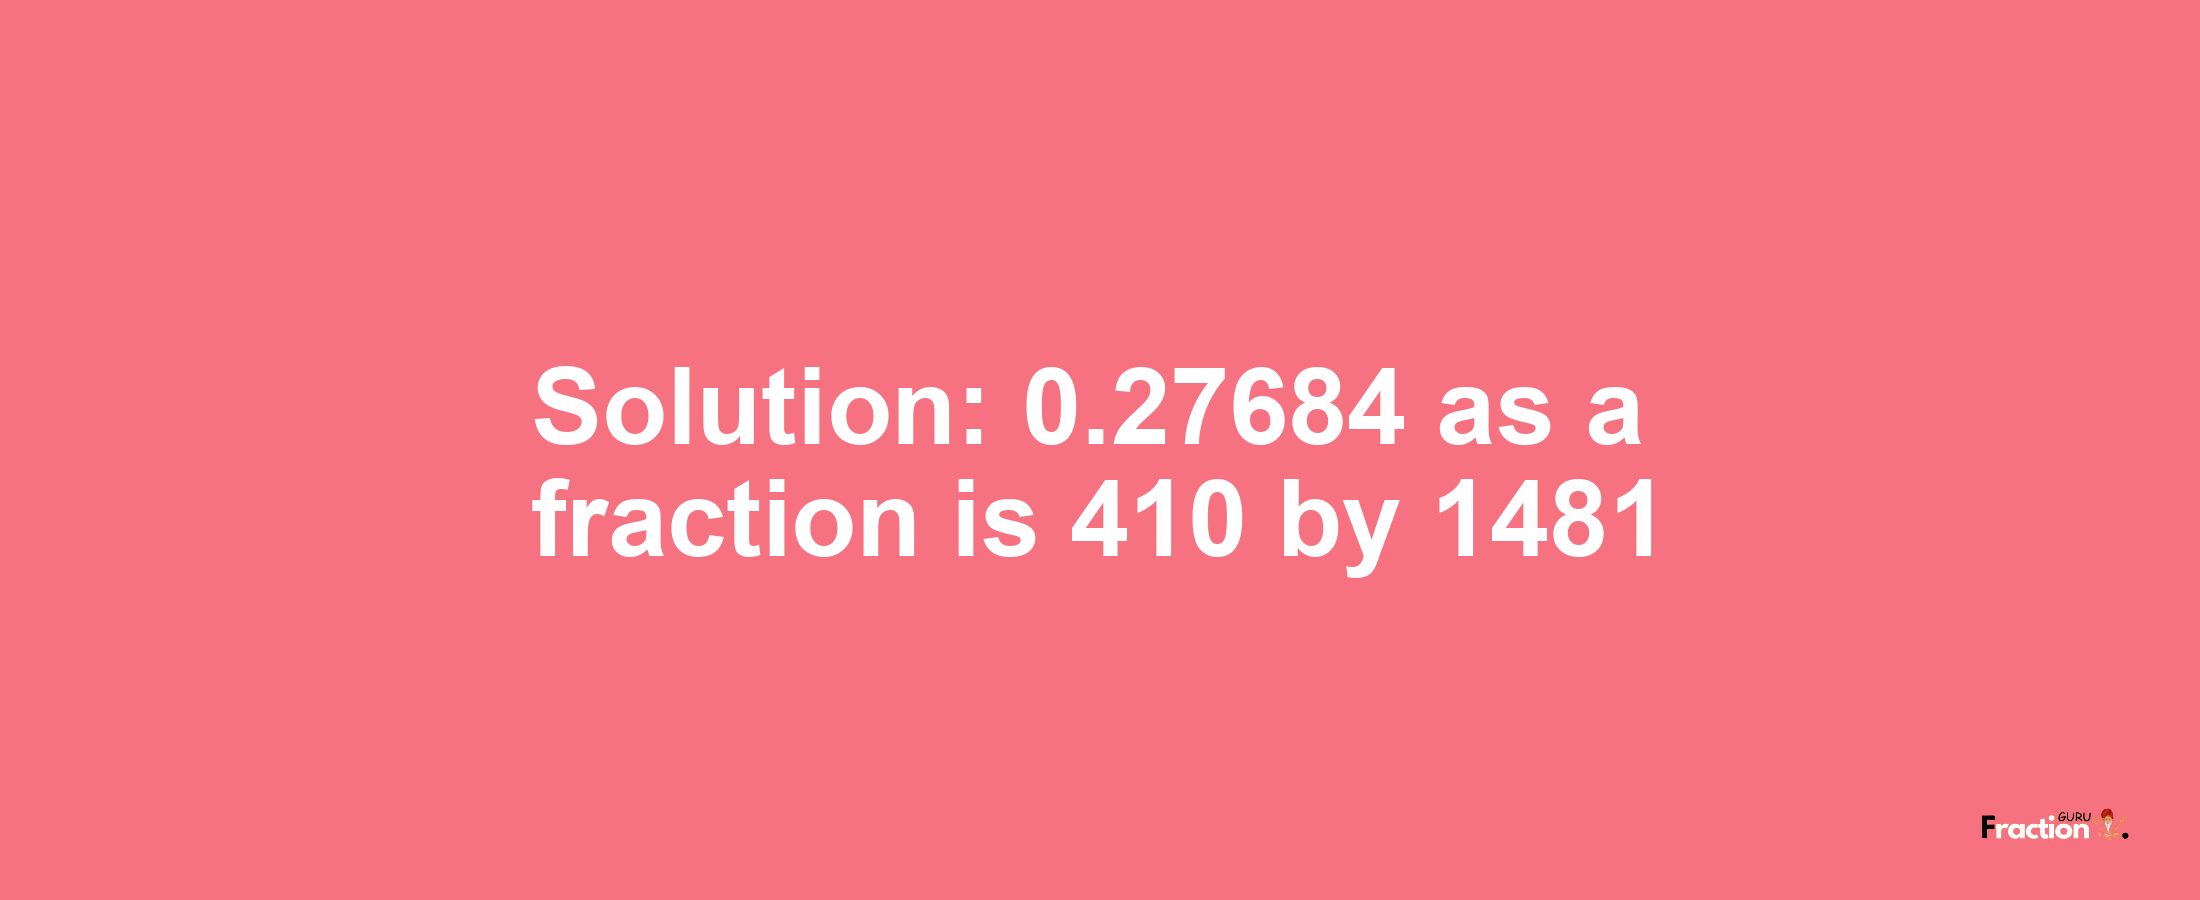 Solution:0.27684 as a fraction is 410/1481